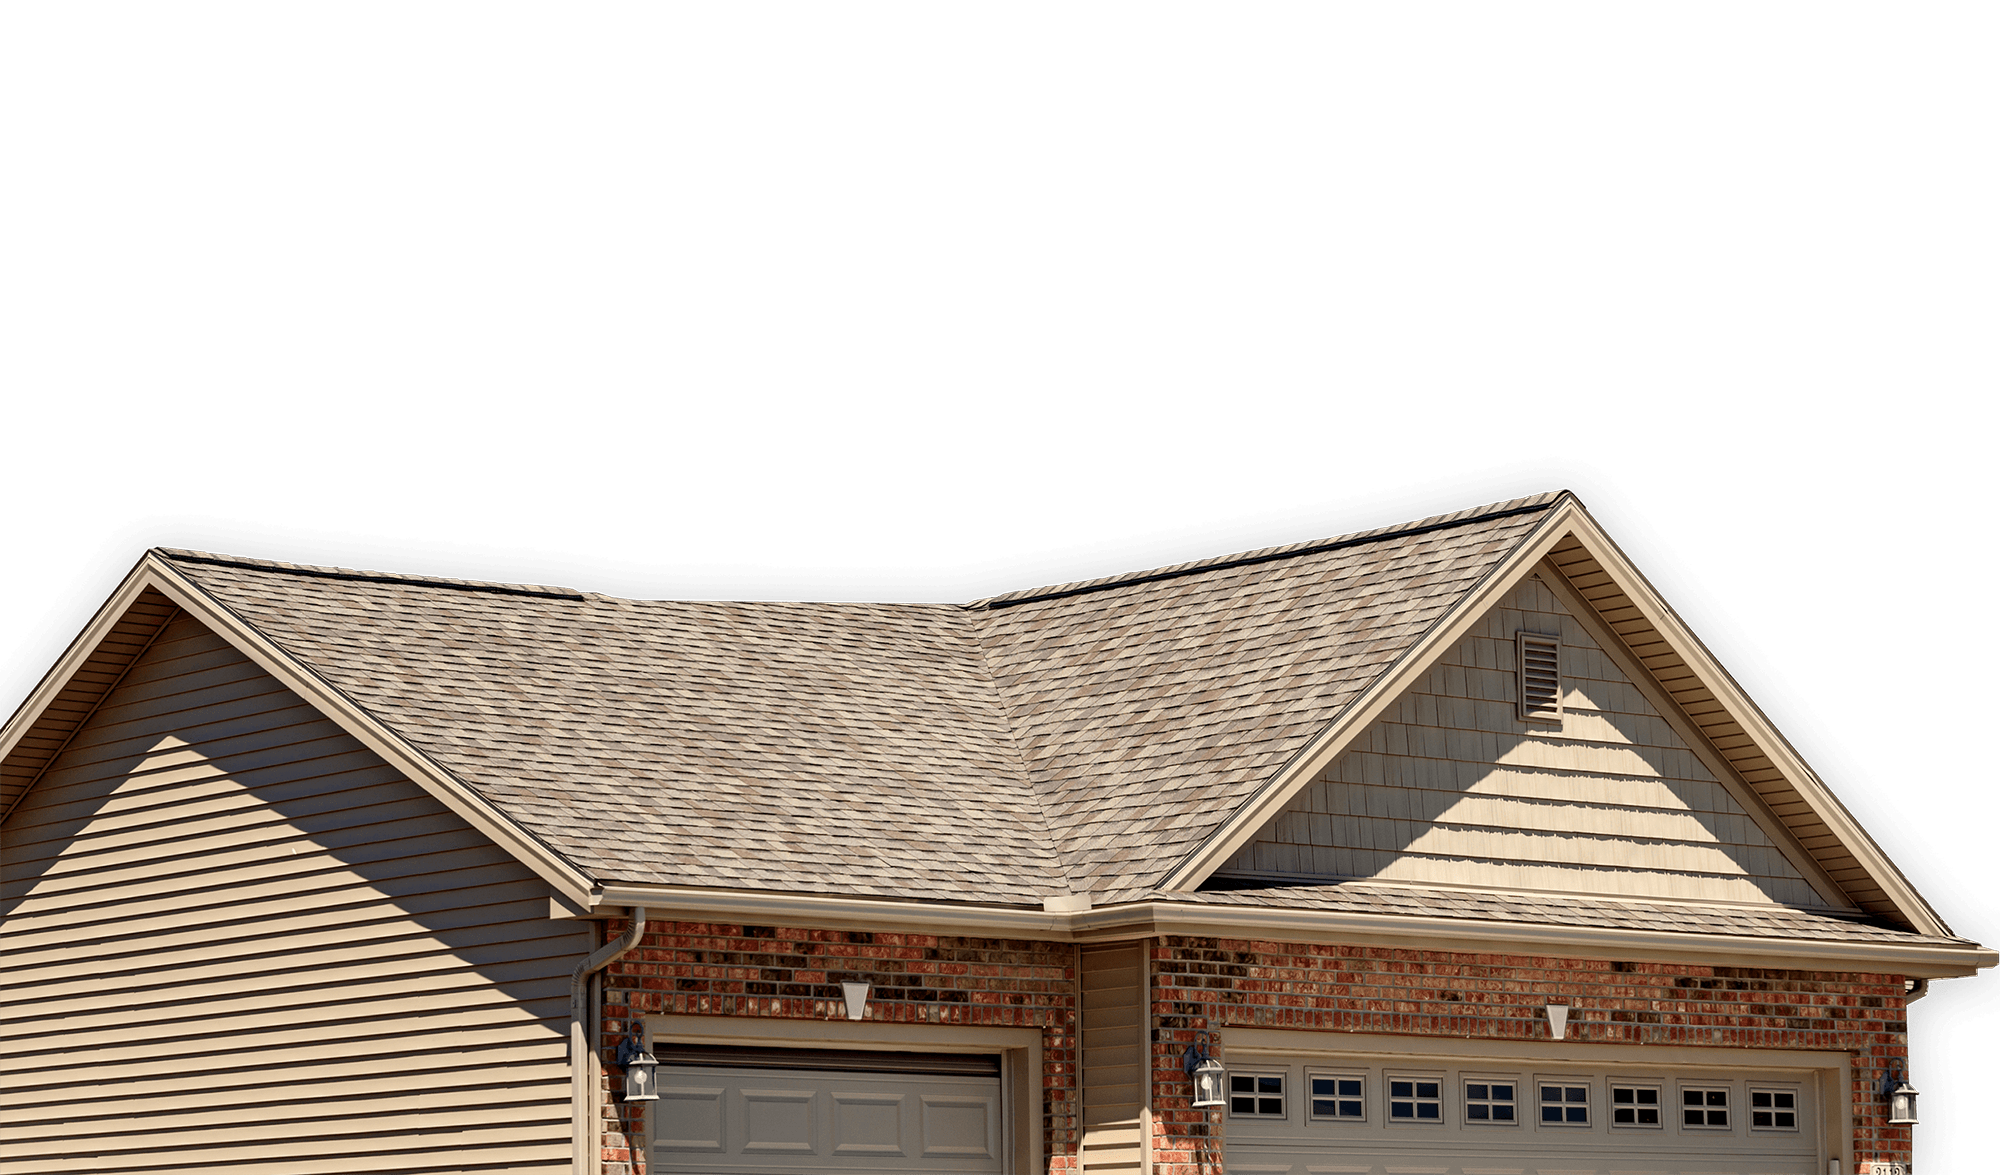 Roofing over a garage and house